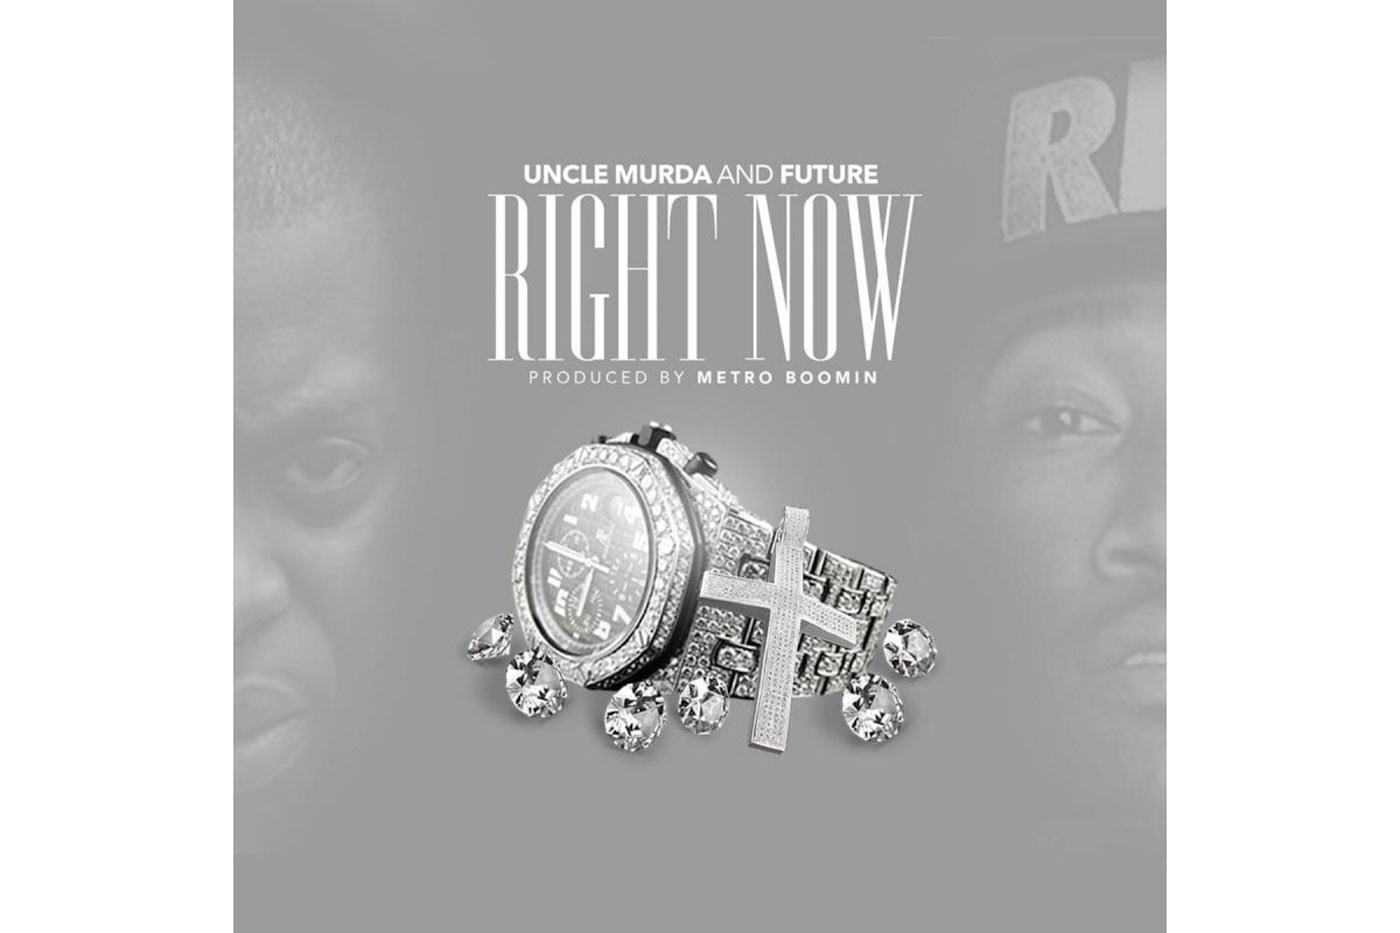 Uncle Murda featuring Future - Right Now (Produced by Metro Boomin)